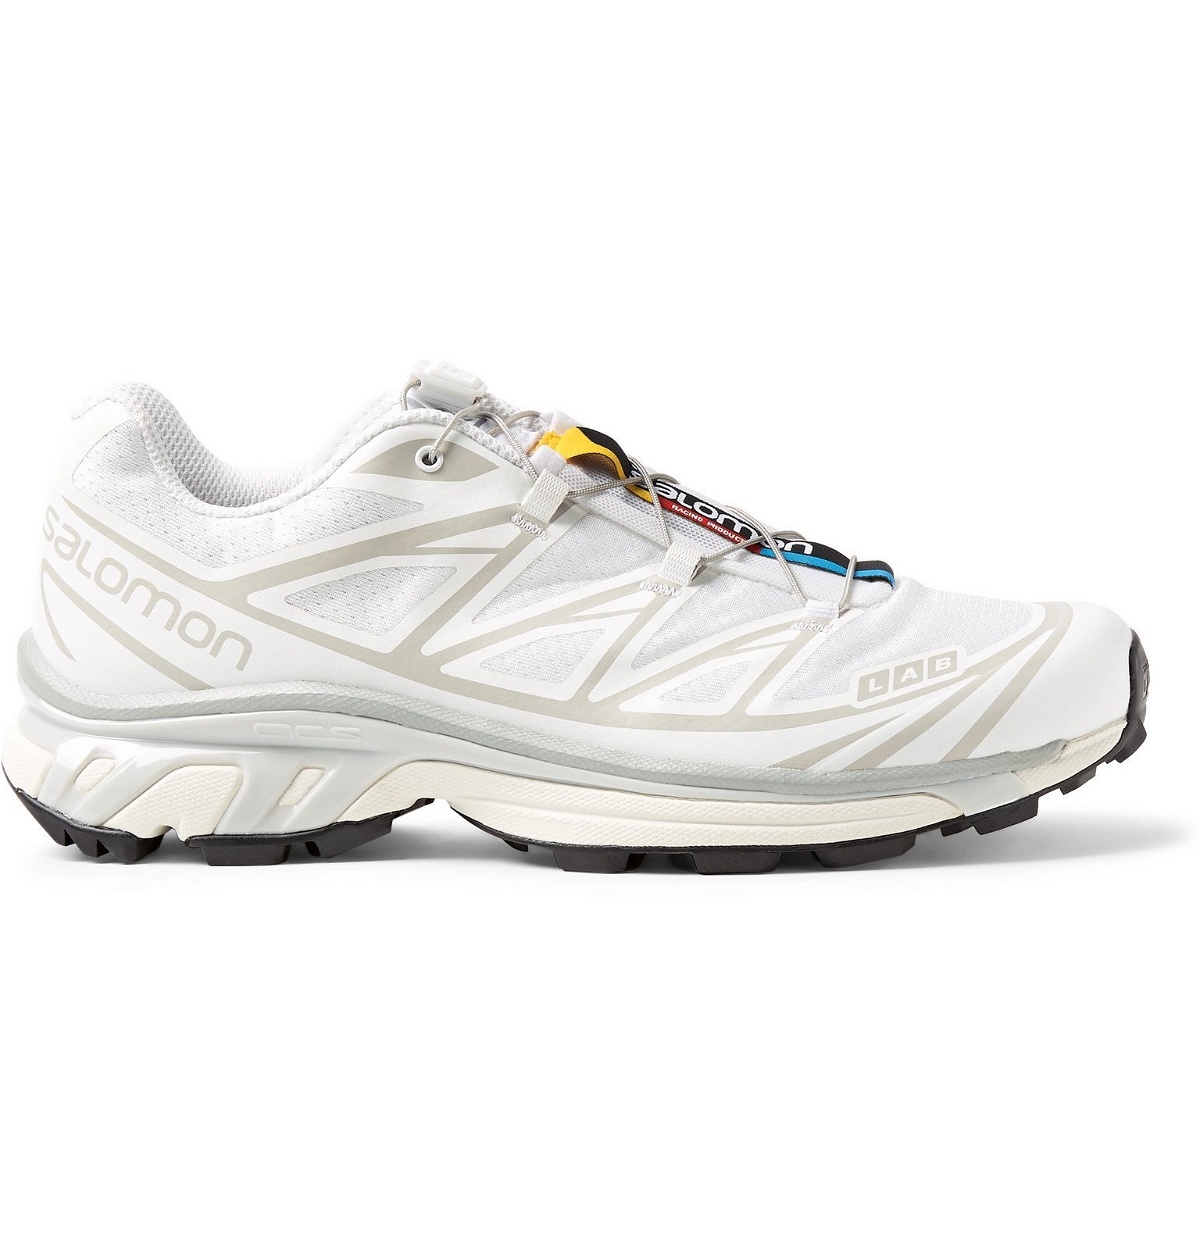 Addition brugerdefinerede Demon Play Salomon - S/LAB XT-6 ADV Mesh and Rubber Running Shoes - White Salomon